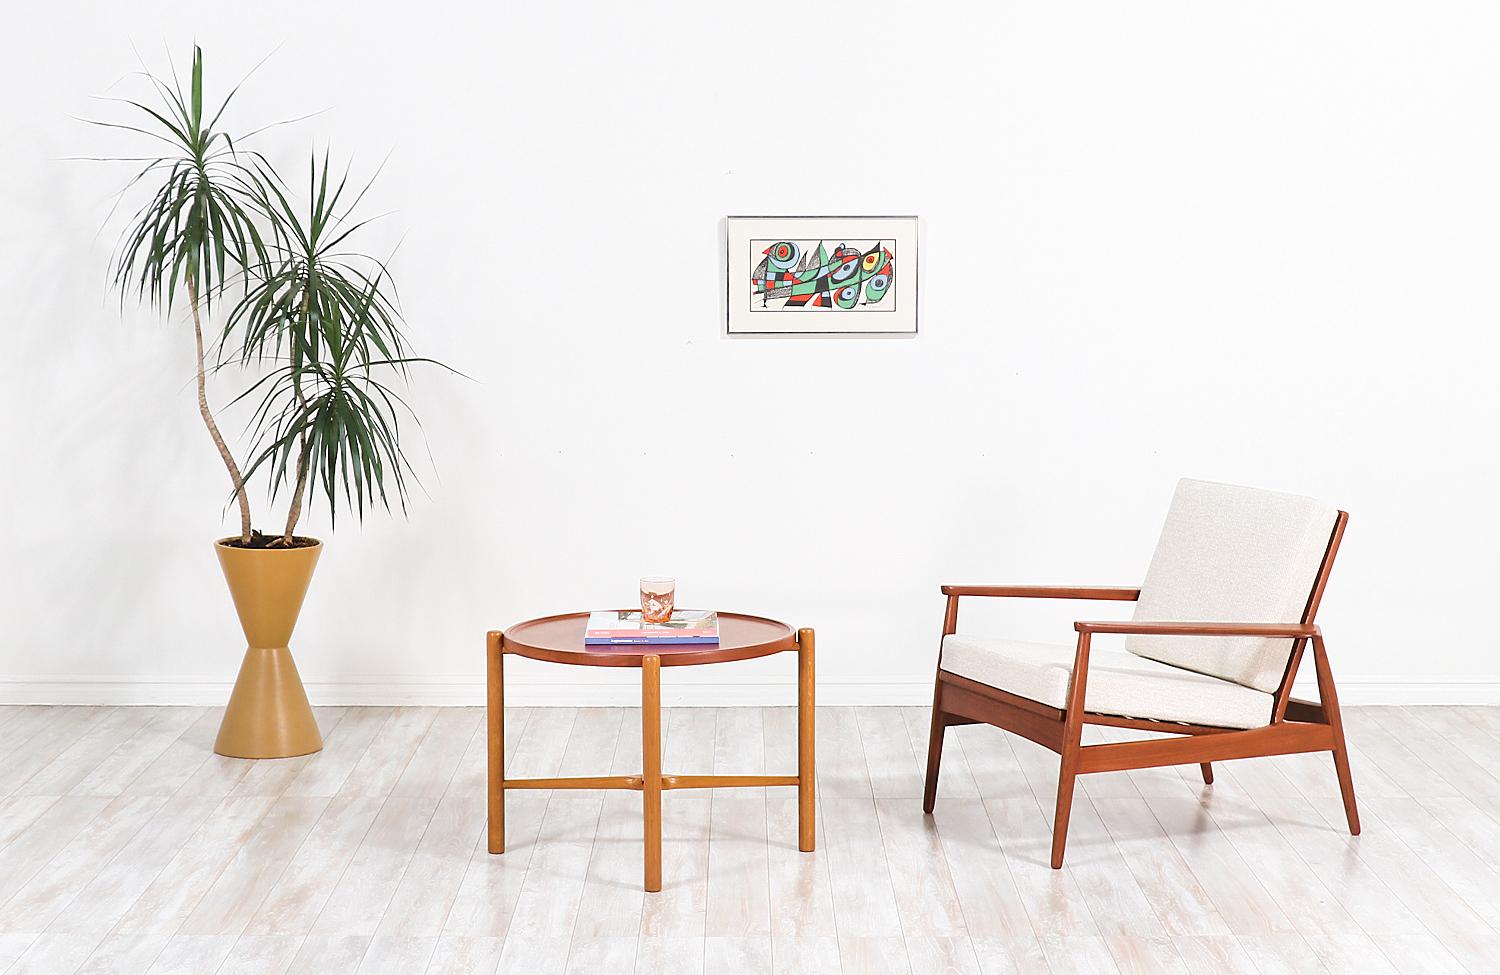 Stylish Danish modern lounge chair designed and manufactured in Denmark, circa 1950s. This elegant chair features a solid teak wood frame with an organic design, curvilinear armrests, and a slatted backrest for a clean aesthetic. The removable